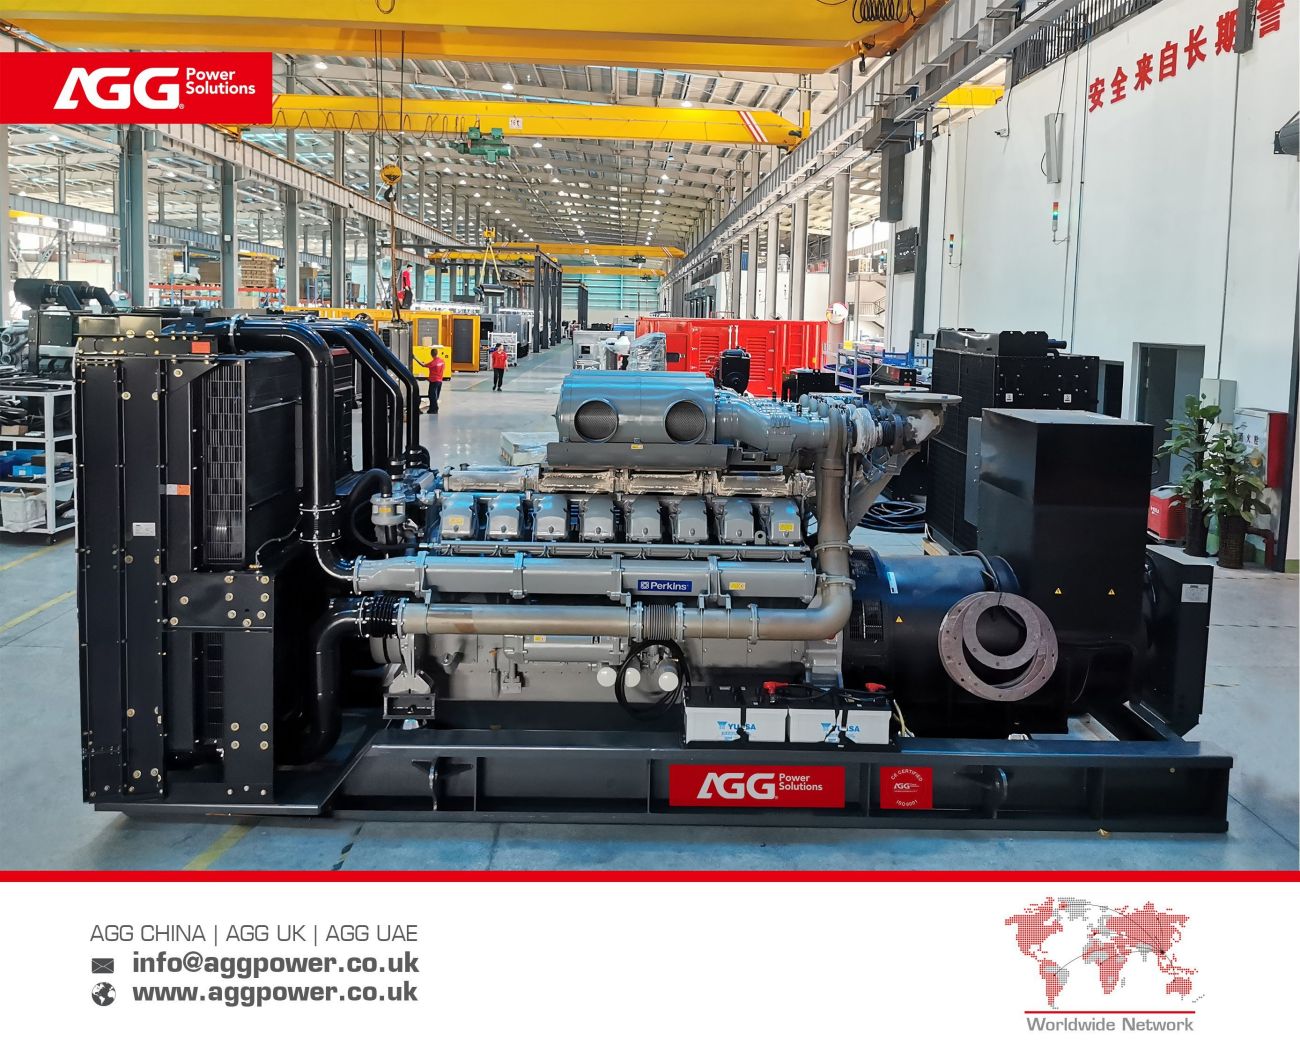 AGG Provides Reliable Perkins-power Diesel Generator Set